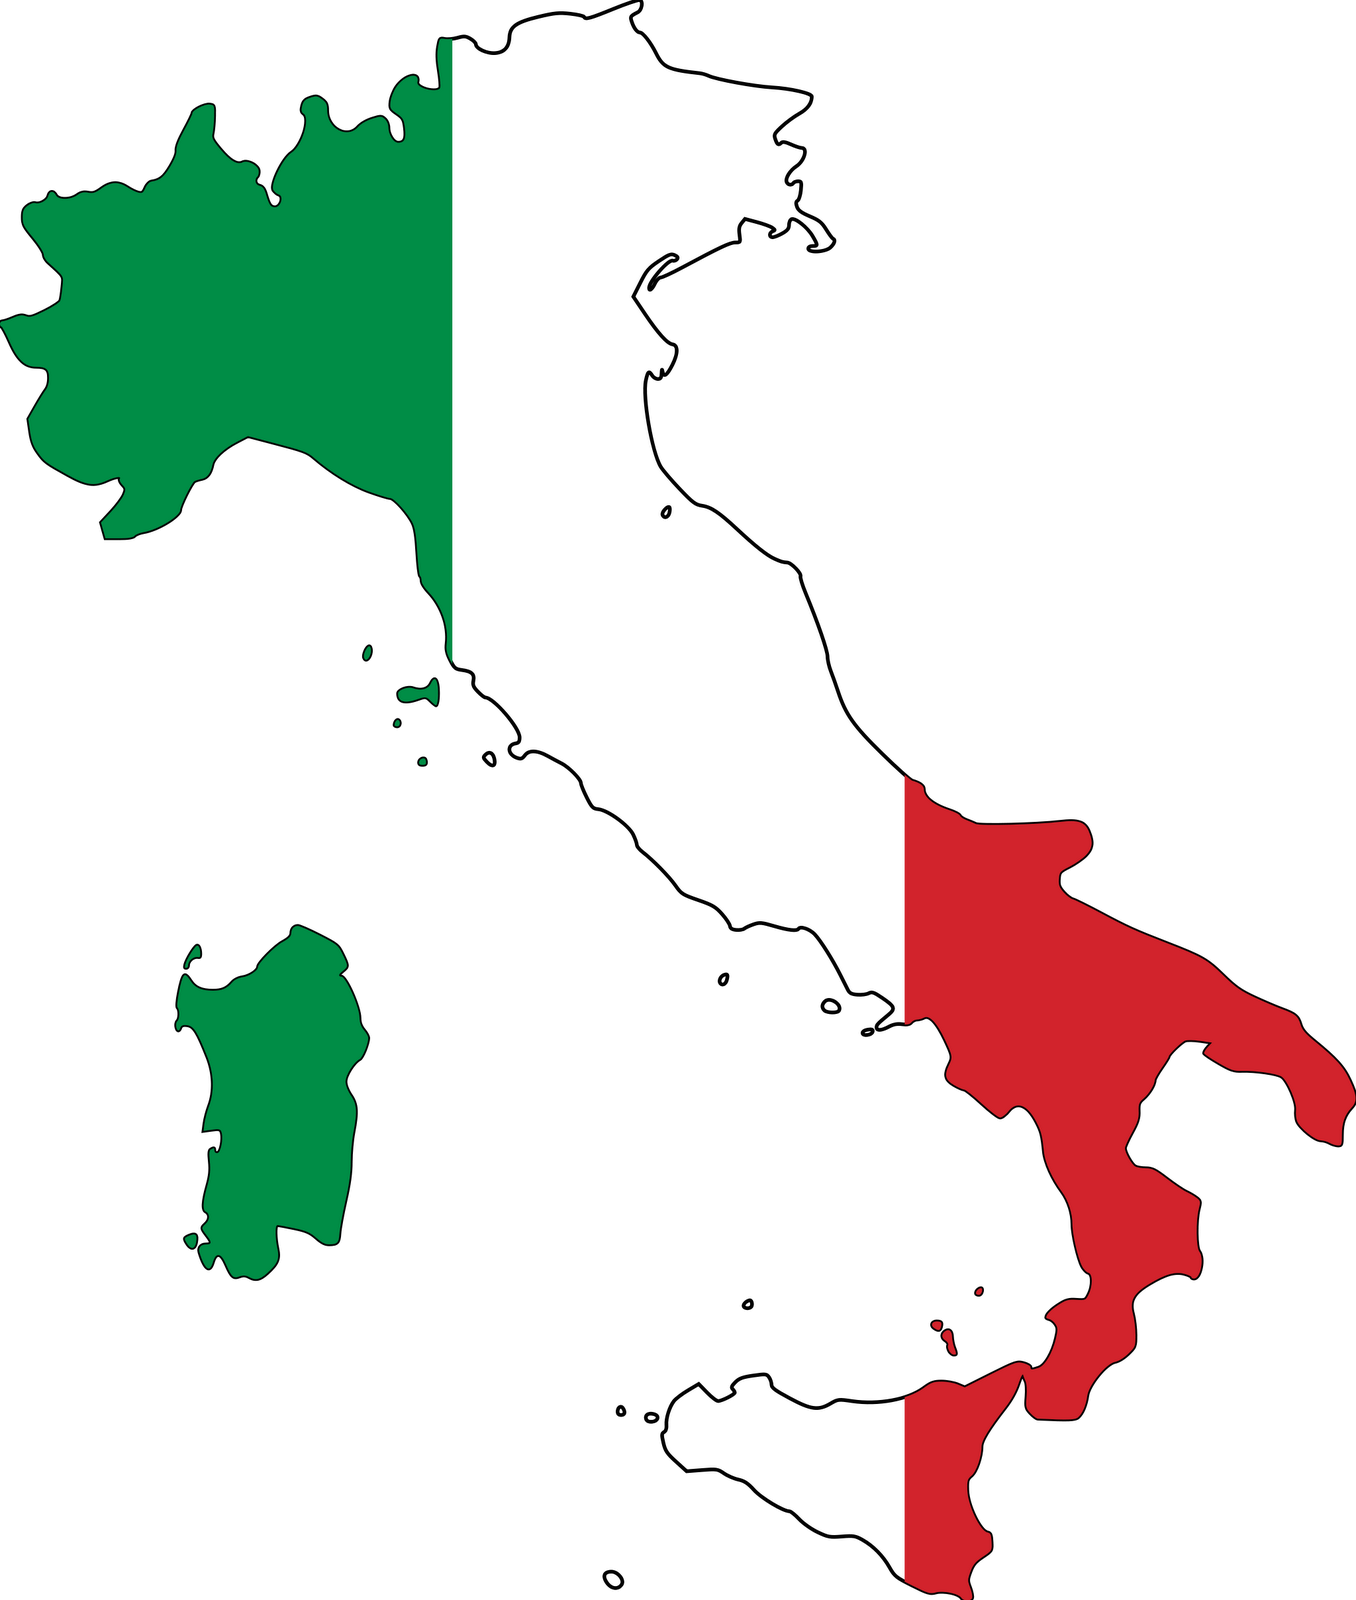 Italy Clip Art Free - Free Clipart Images